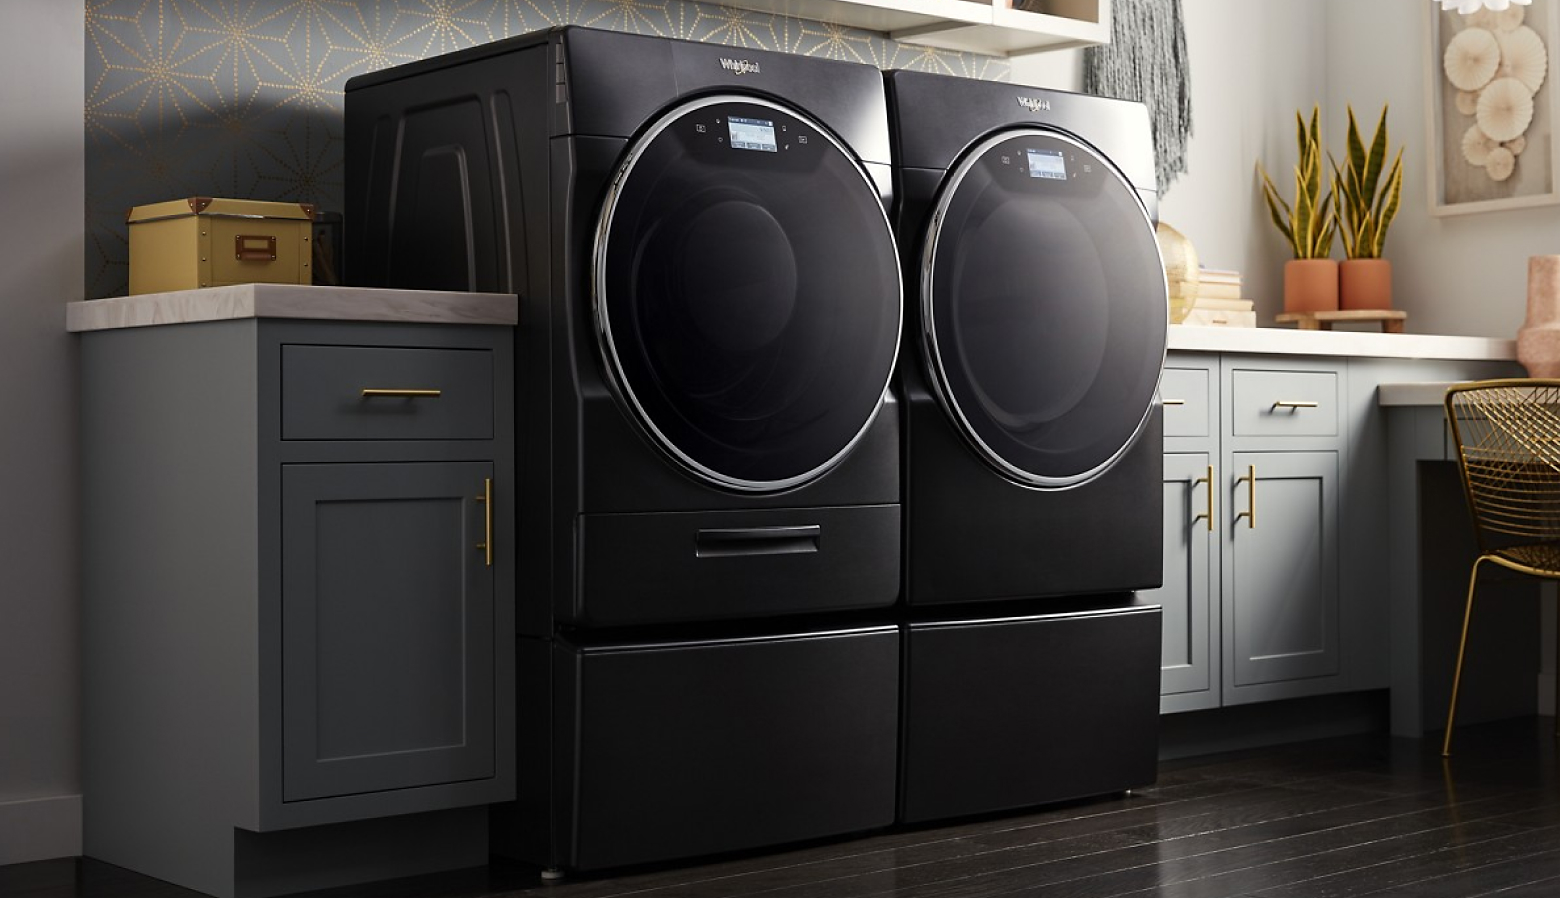 A front load washer and dryer in a white laundry room.